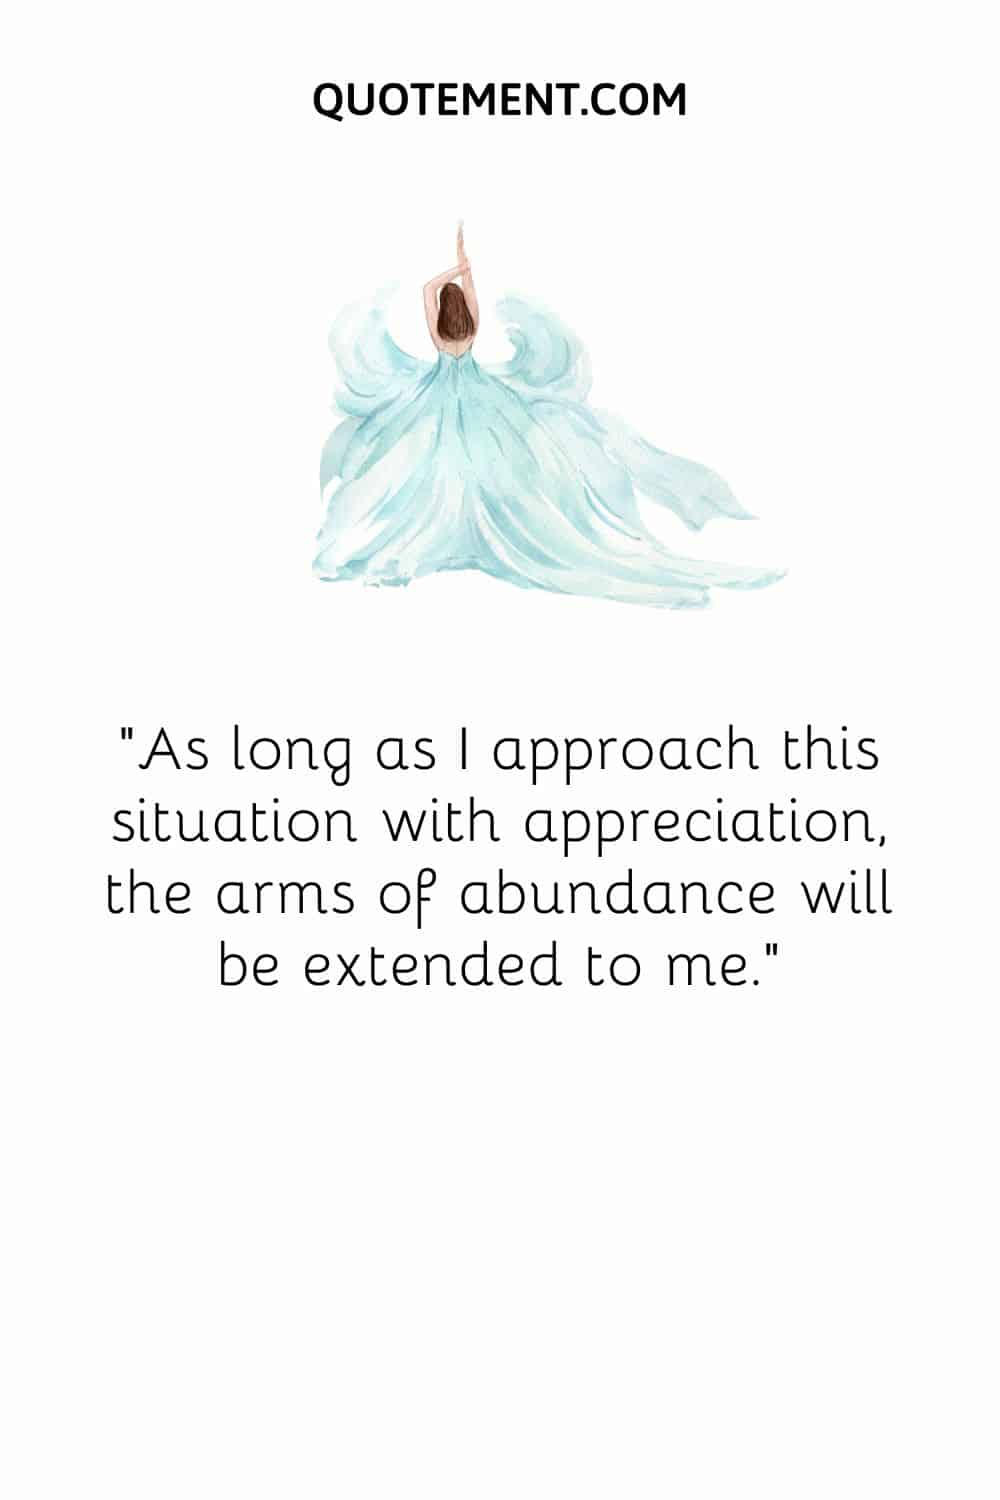 As long as I approach this situation with appreciation, the arms of abundance will be extended to me